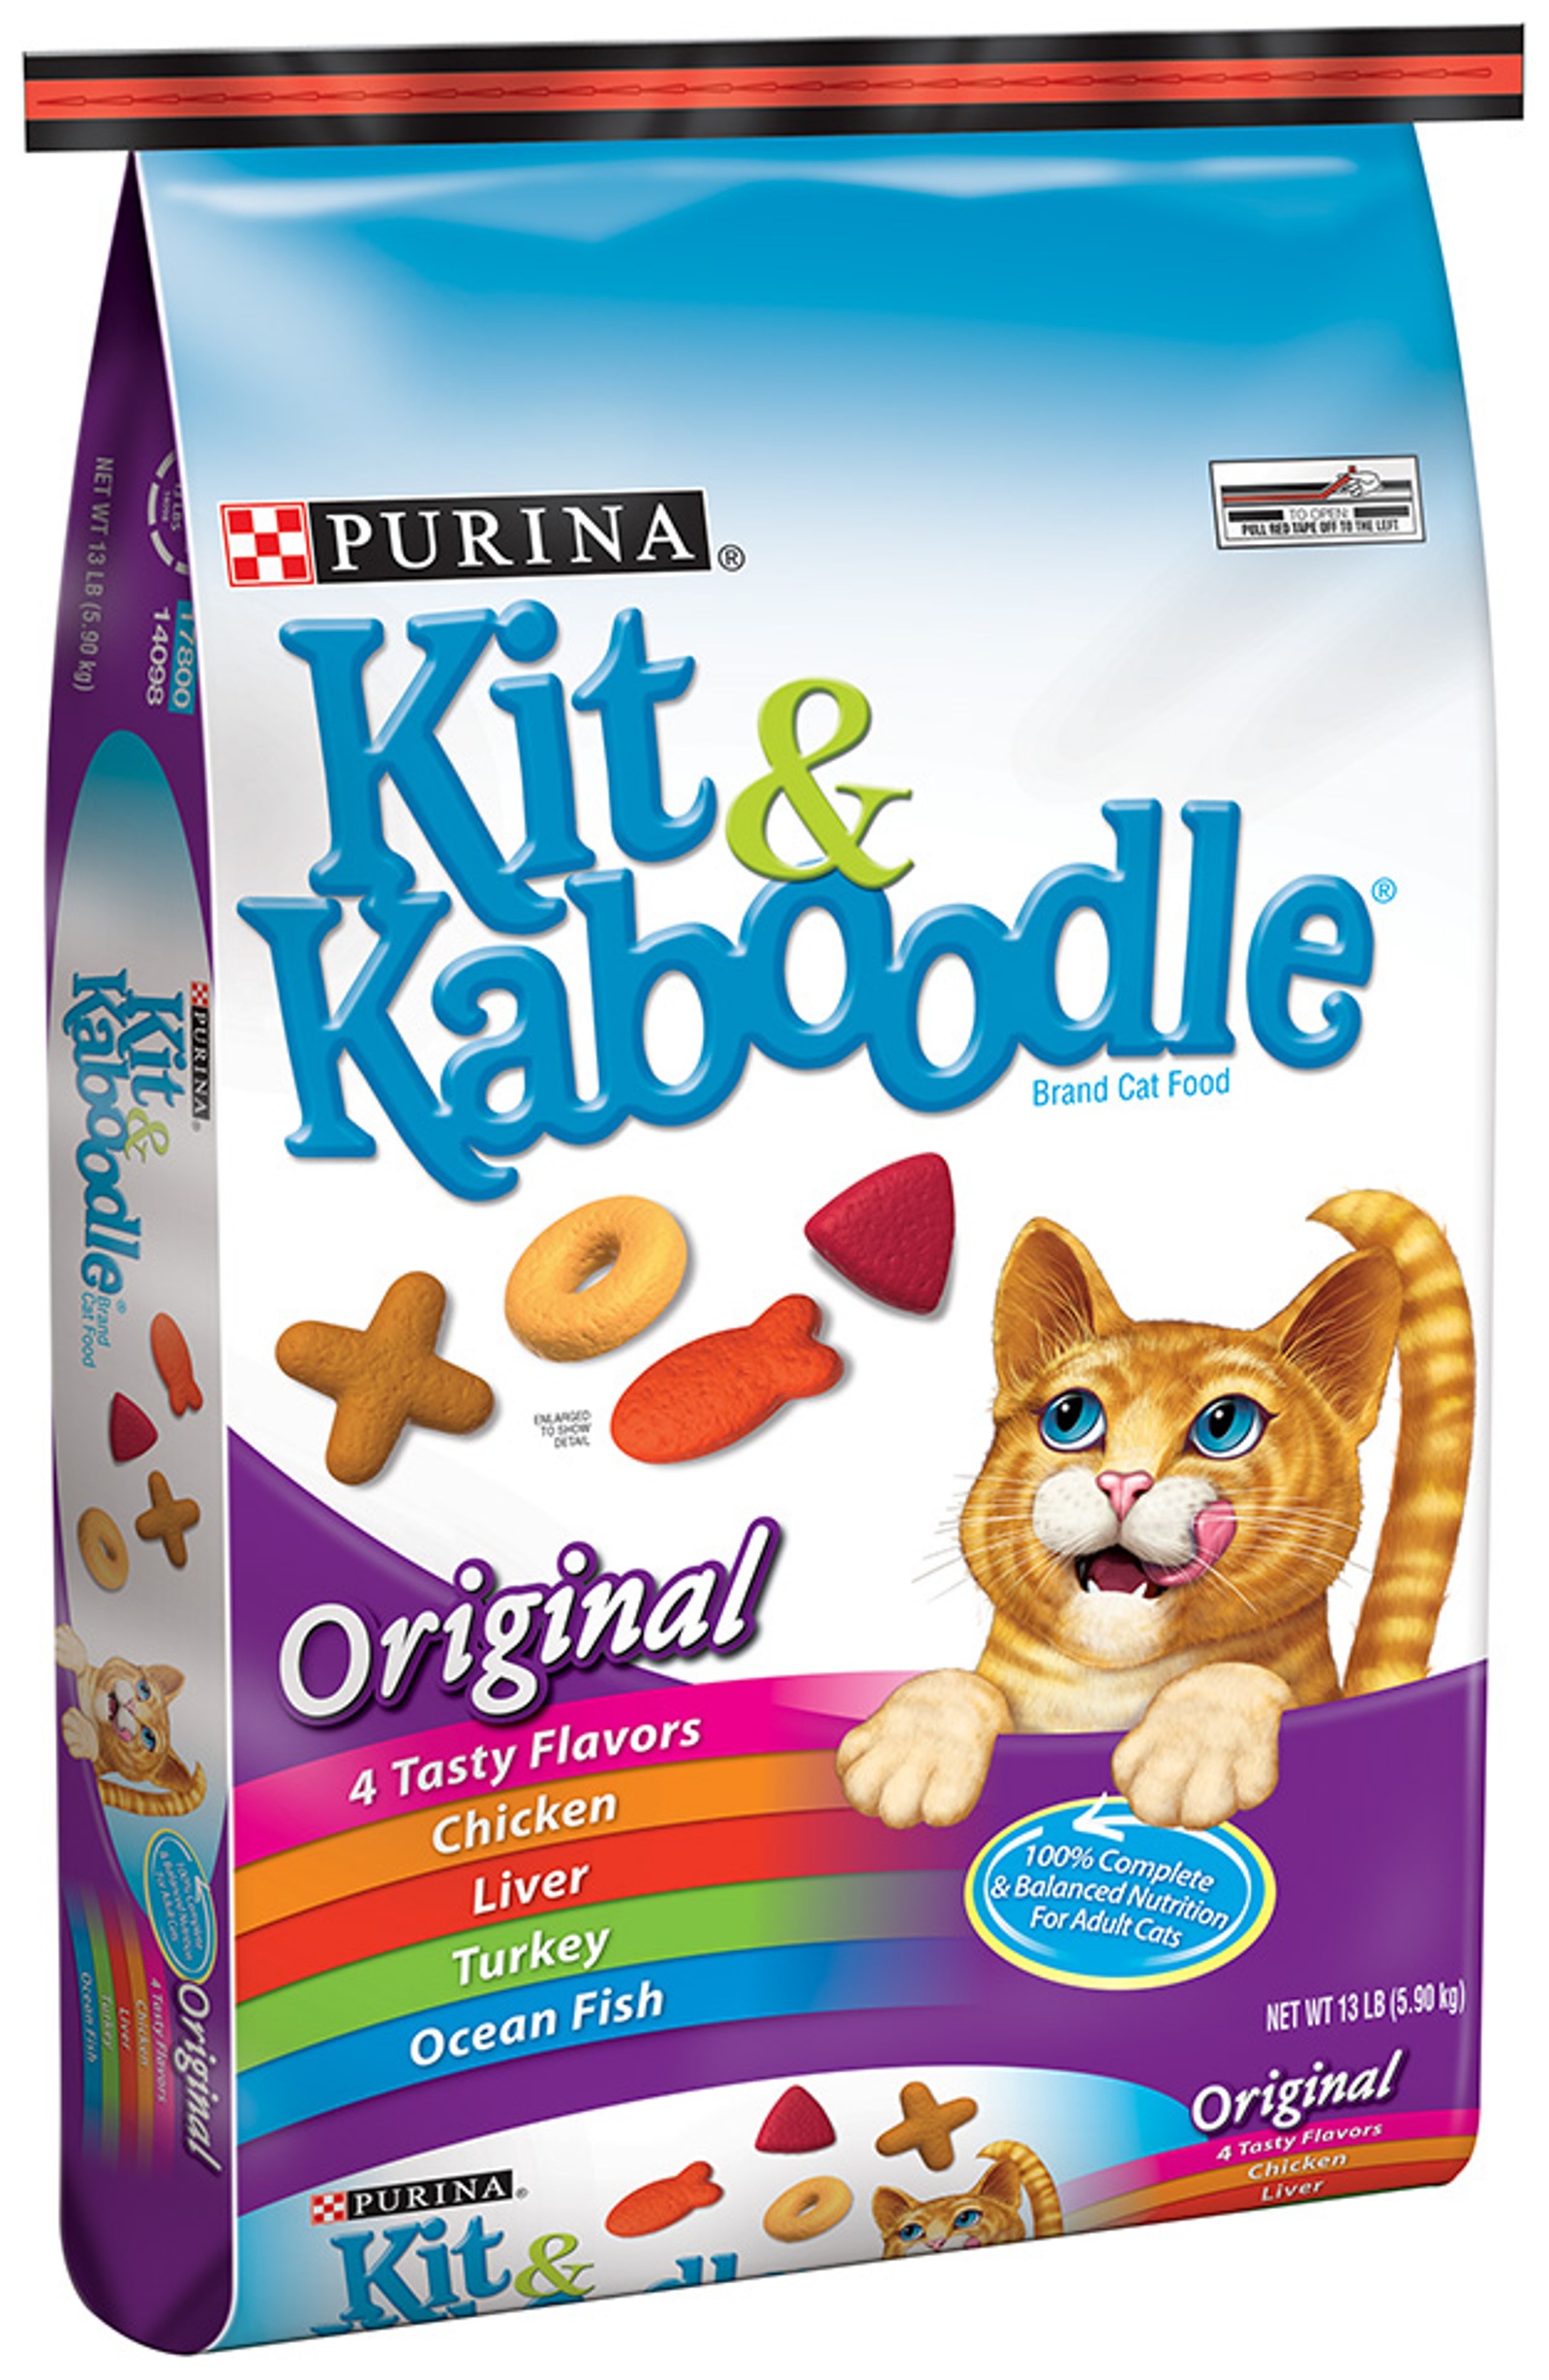 Purina Kit and Caboodle Cat Food (13 lbs)